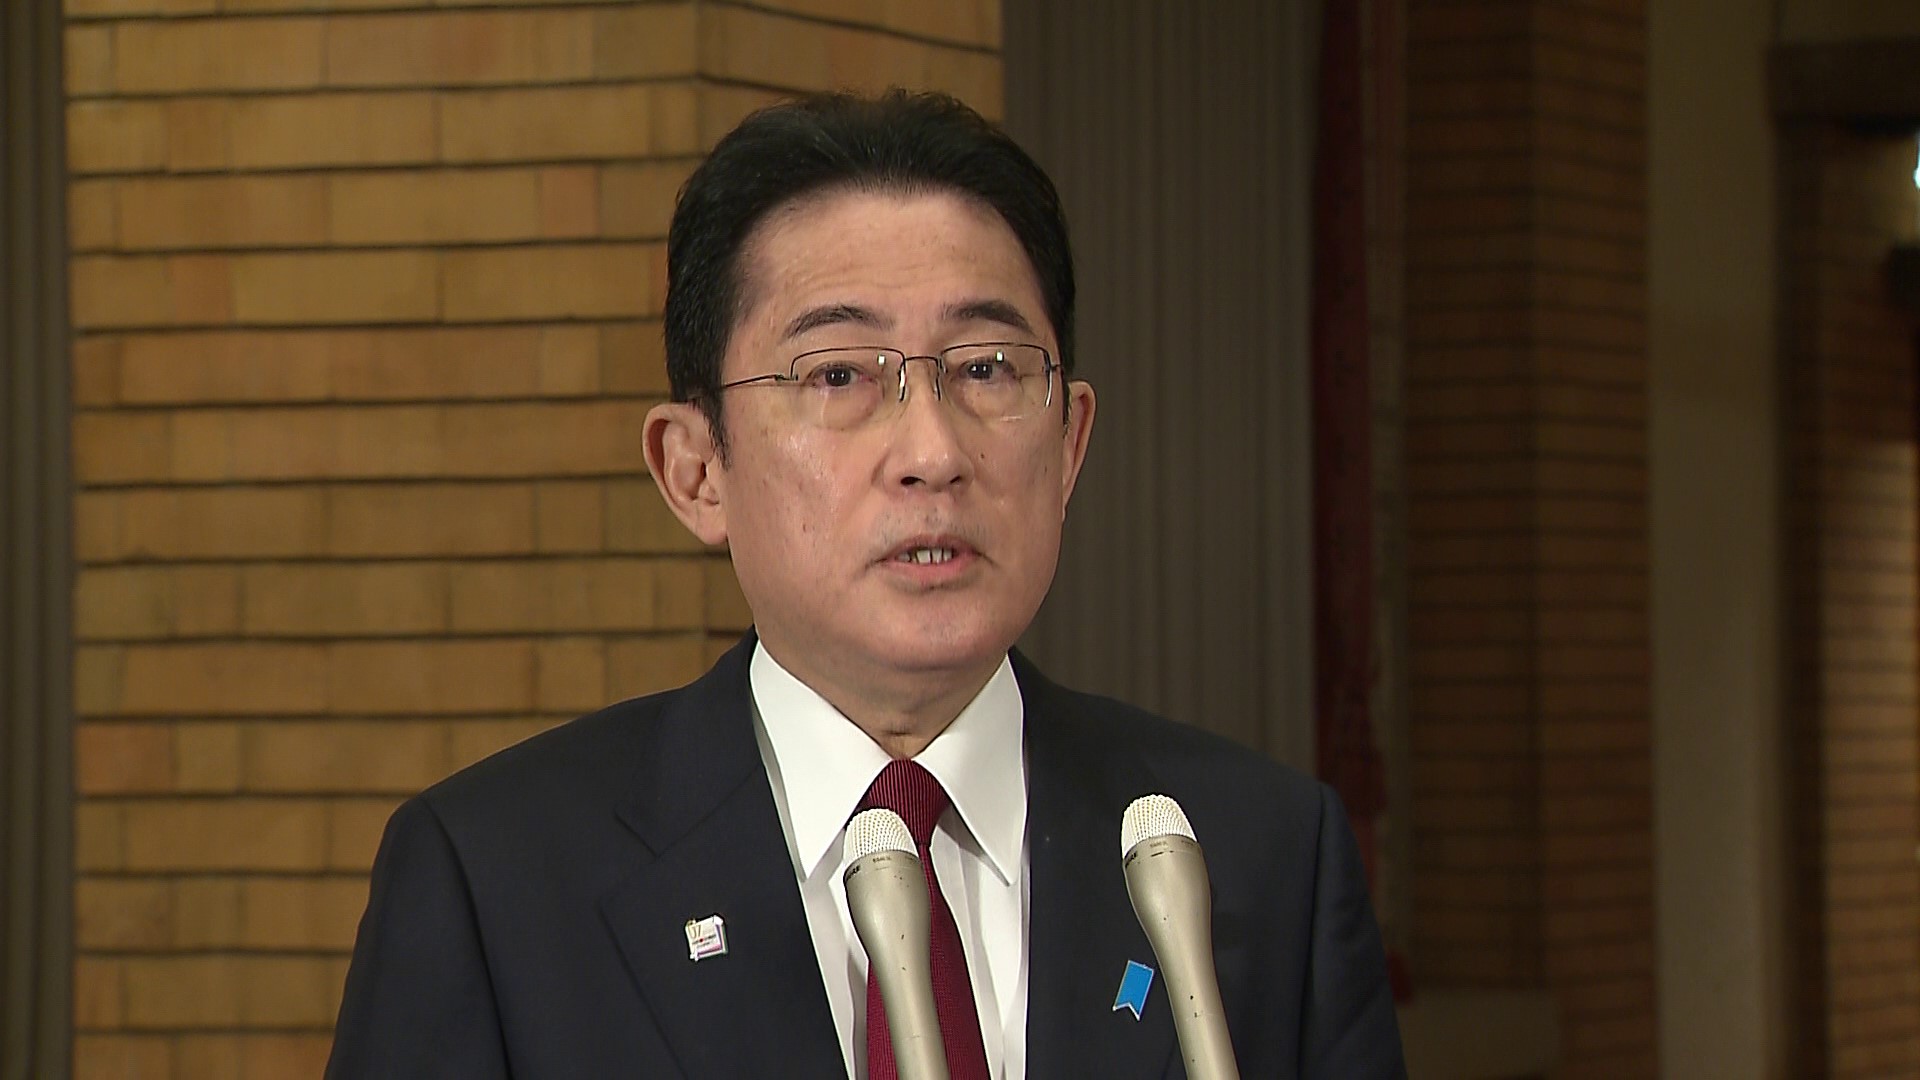 Press Conference by Prime Minister Kishida Regarding His Visit to India